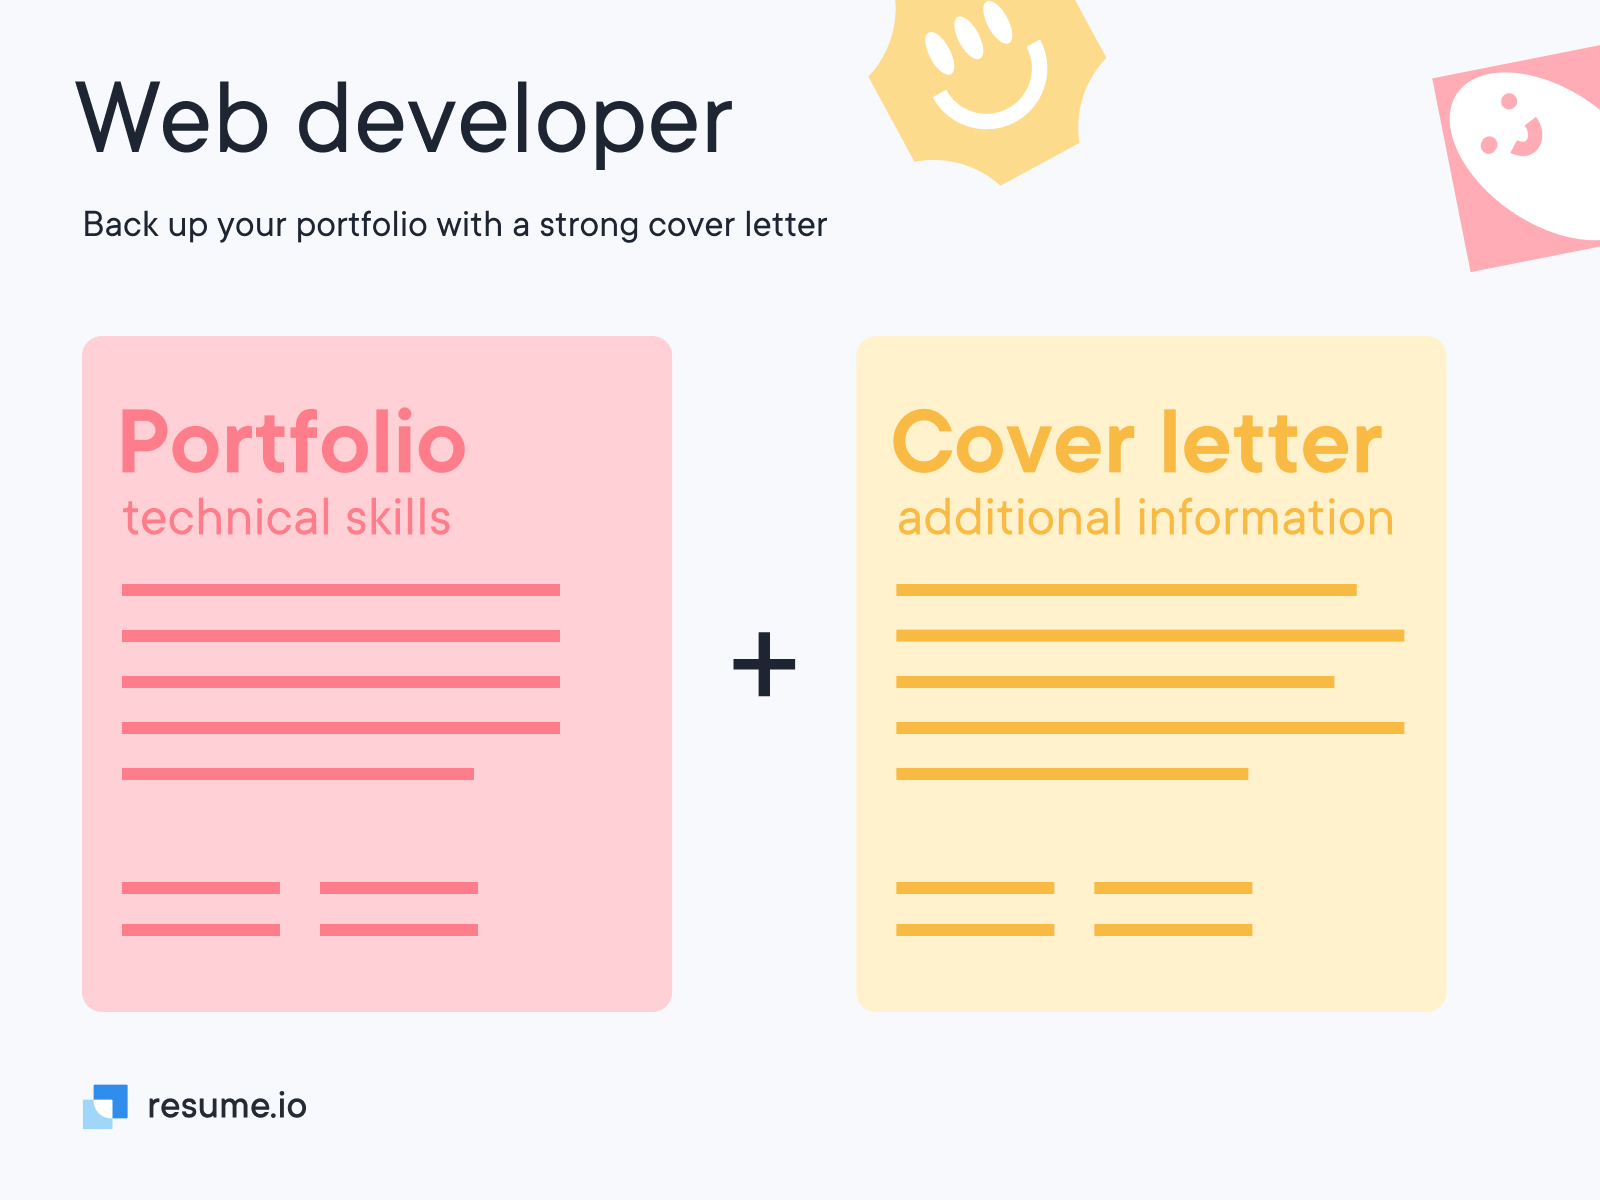 Web developer: Back up your portfolio with a strong cover letter. 